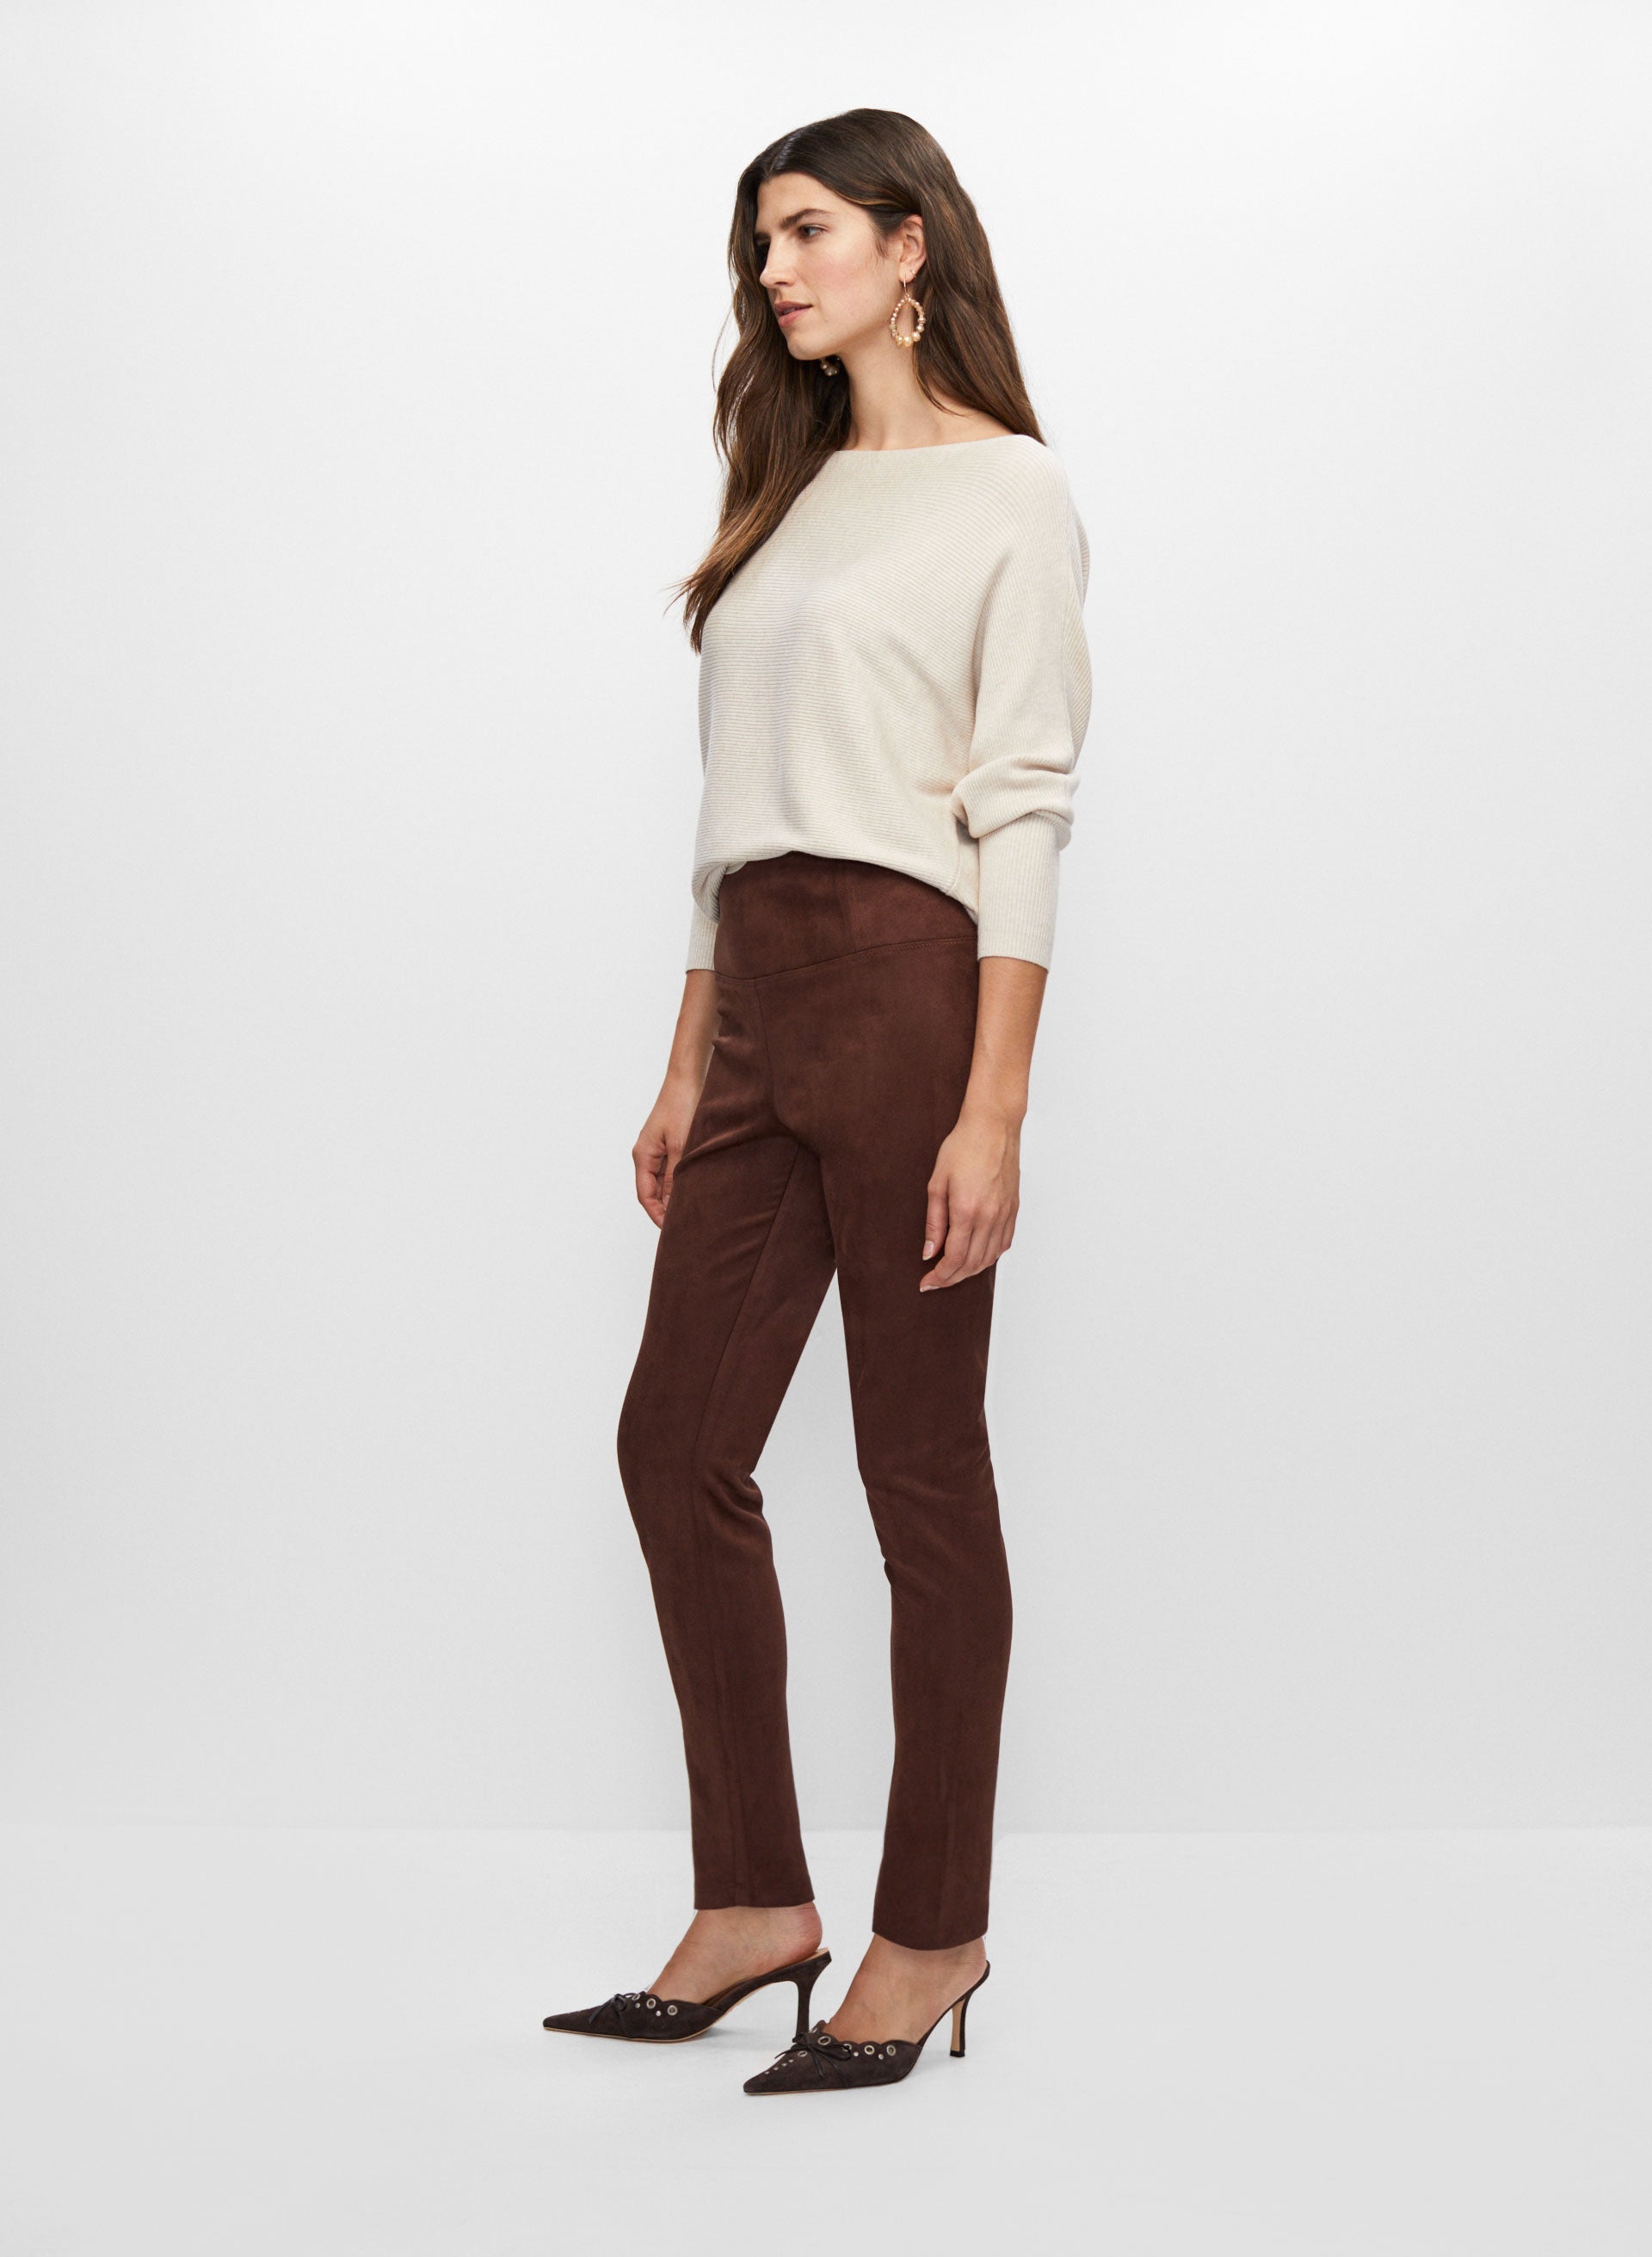 Pull-on Faux Suede Leggings